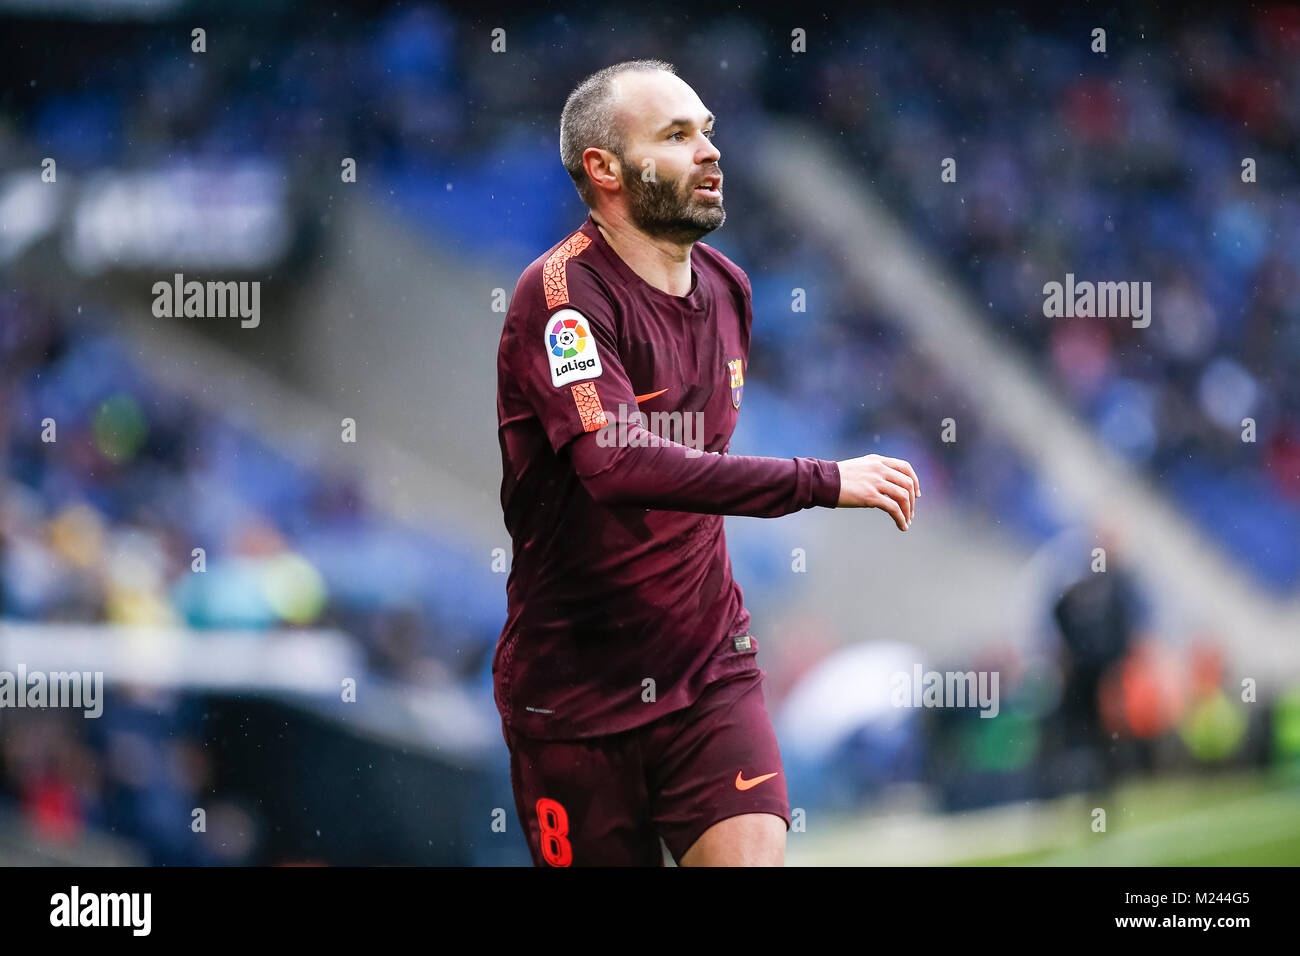 Barcelona, Spain. 04th Feb, 2018. FC Barcelona midfielder Andres Iniesta (8) during the match between RCD Espanyol and FC Barcelona, for the round 22 of the Liga Santander, played at RCDE Stadium on 4th February 2018 in Barcelona, Spain. Credit: Gtres Información más Comuniación on line, S.L./Alamy Live News Stock Photo